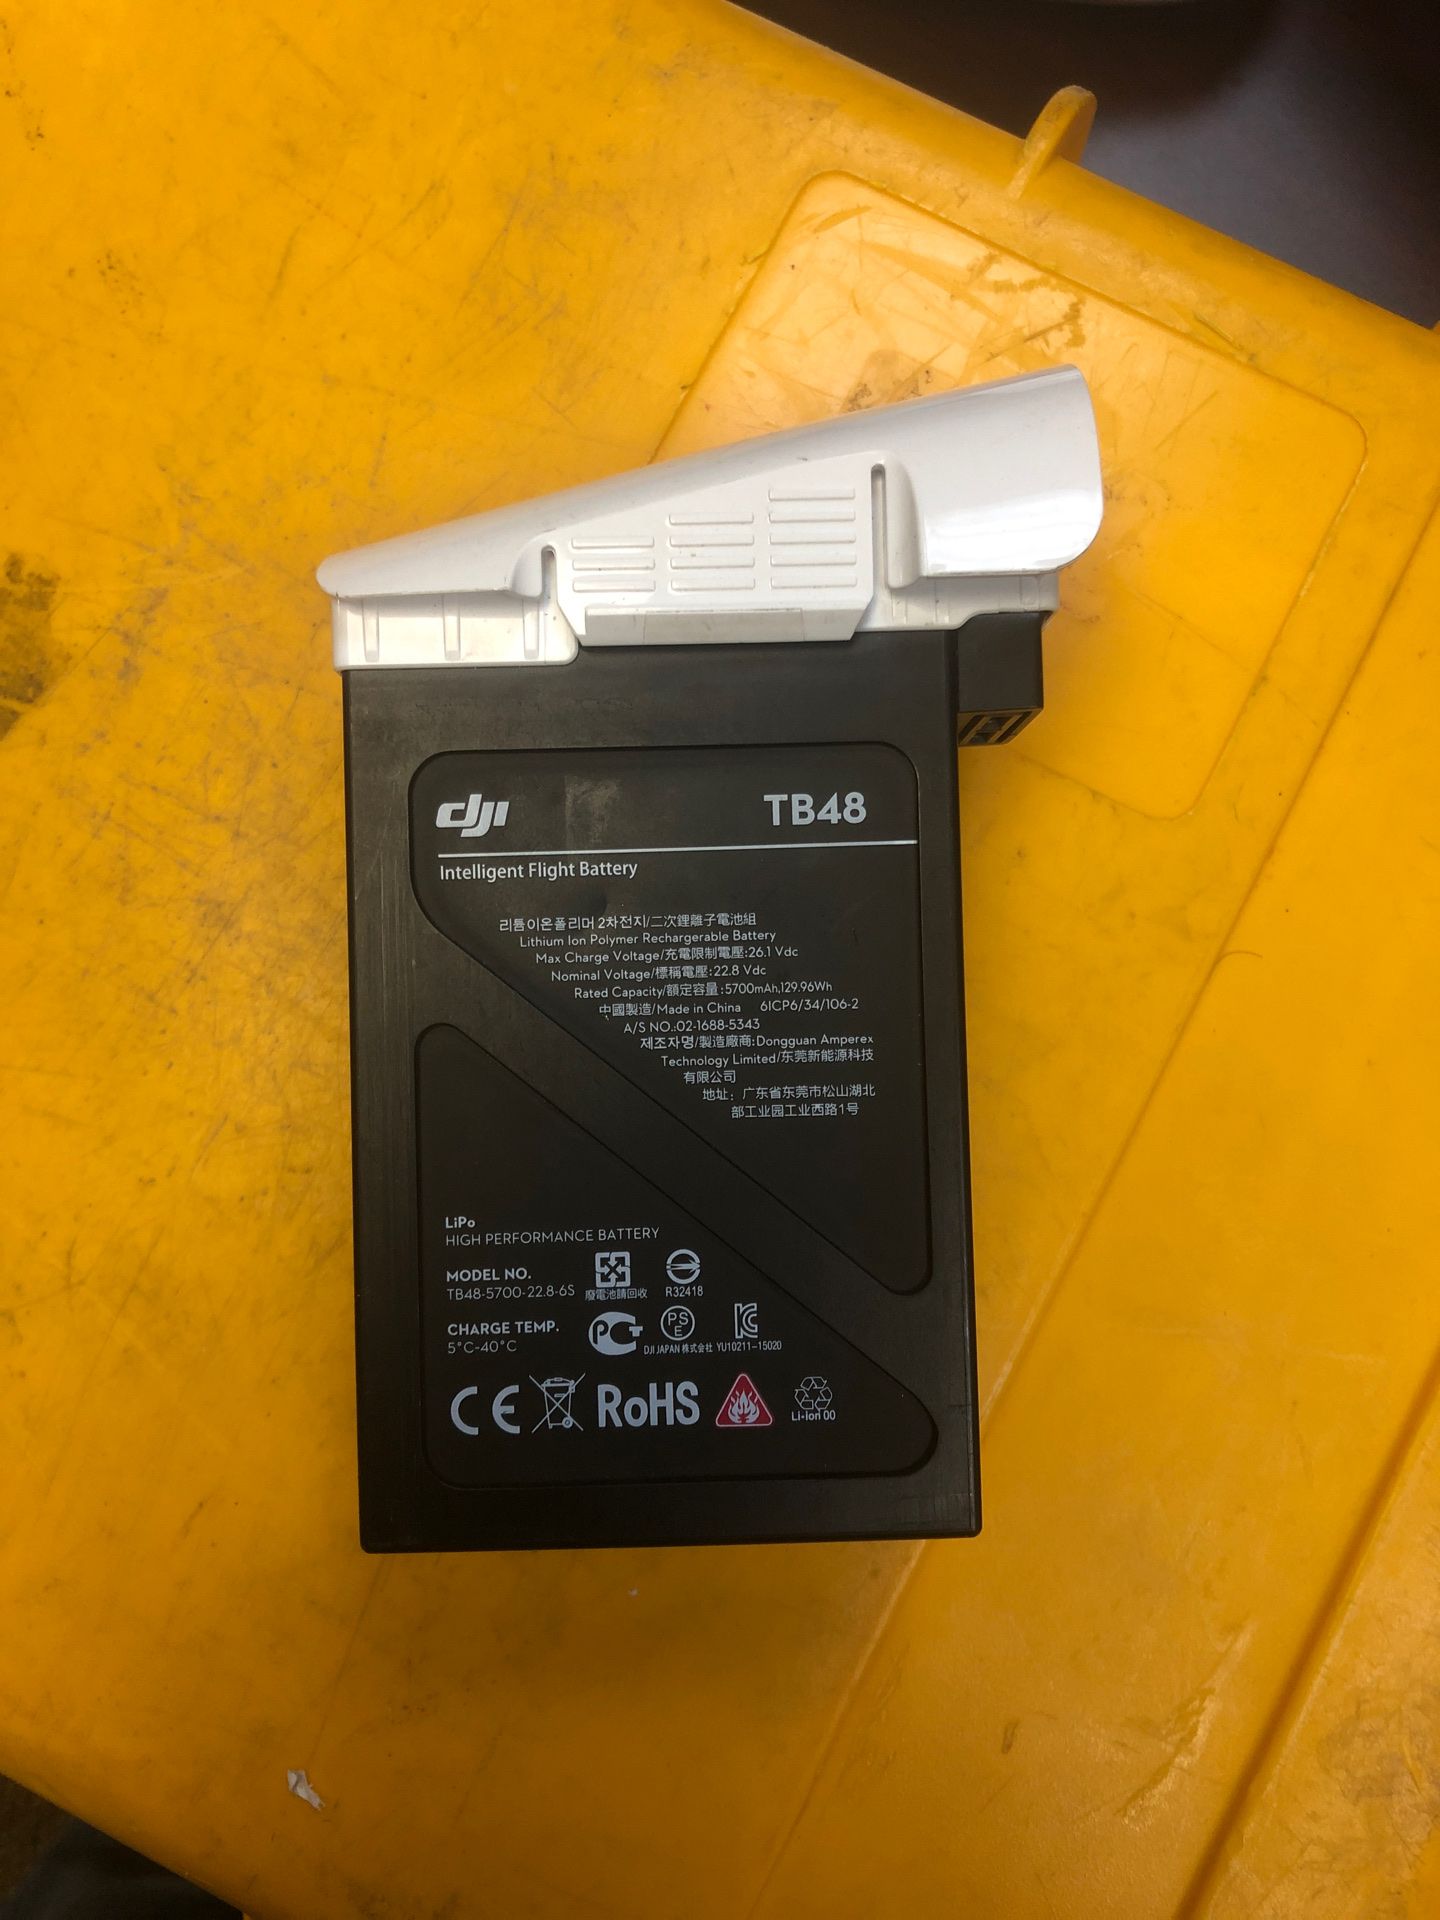 Dji TB48 battery for Inspire 1 drone